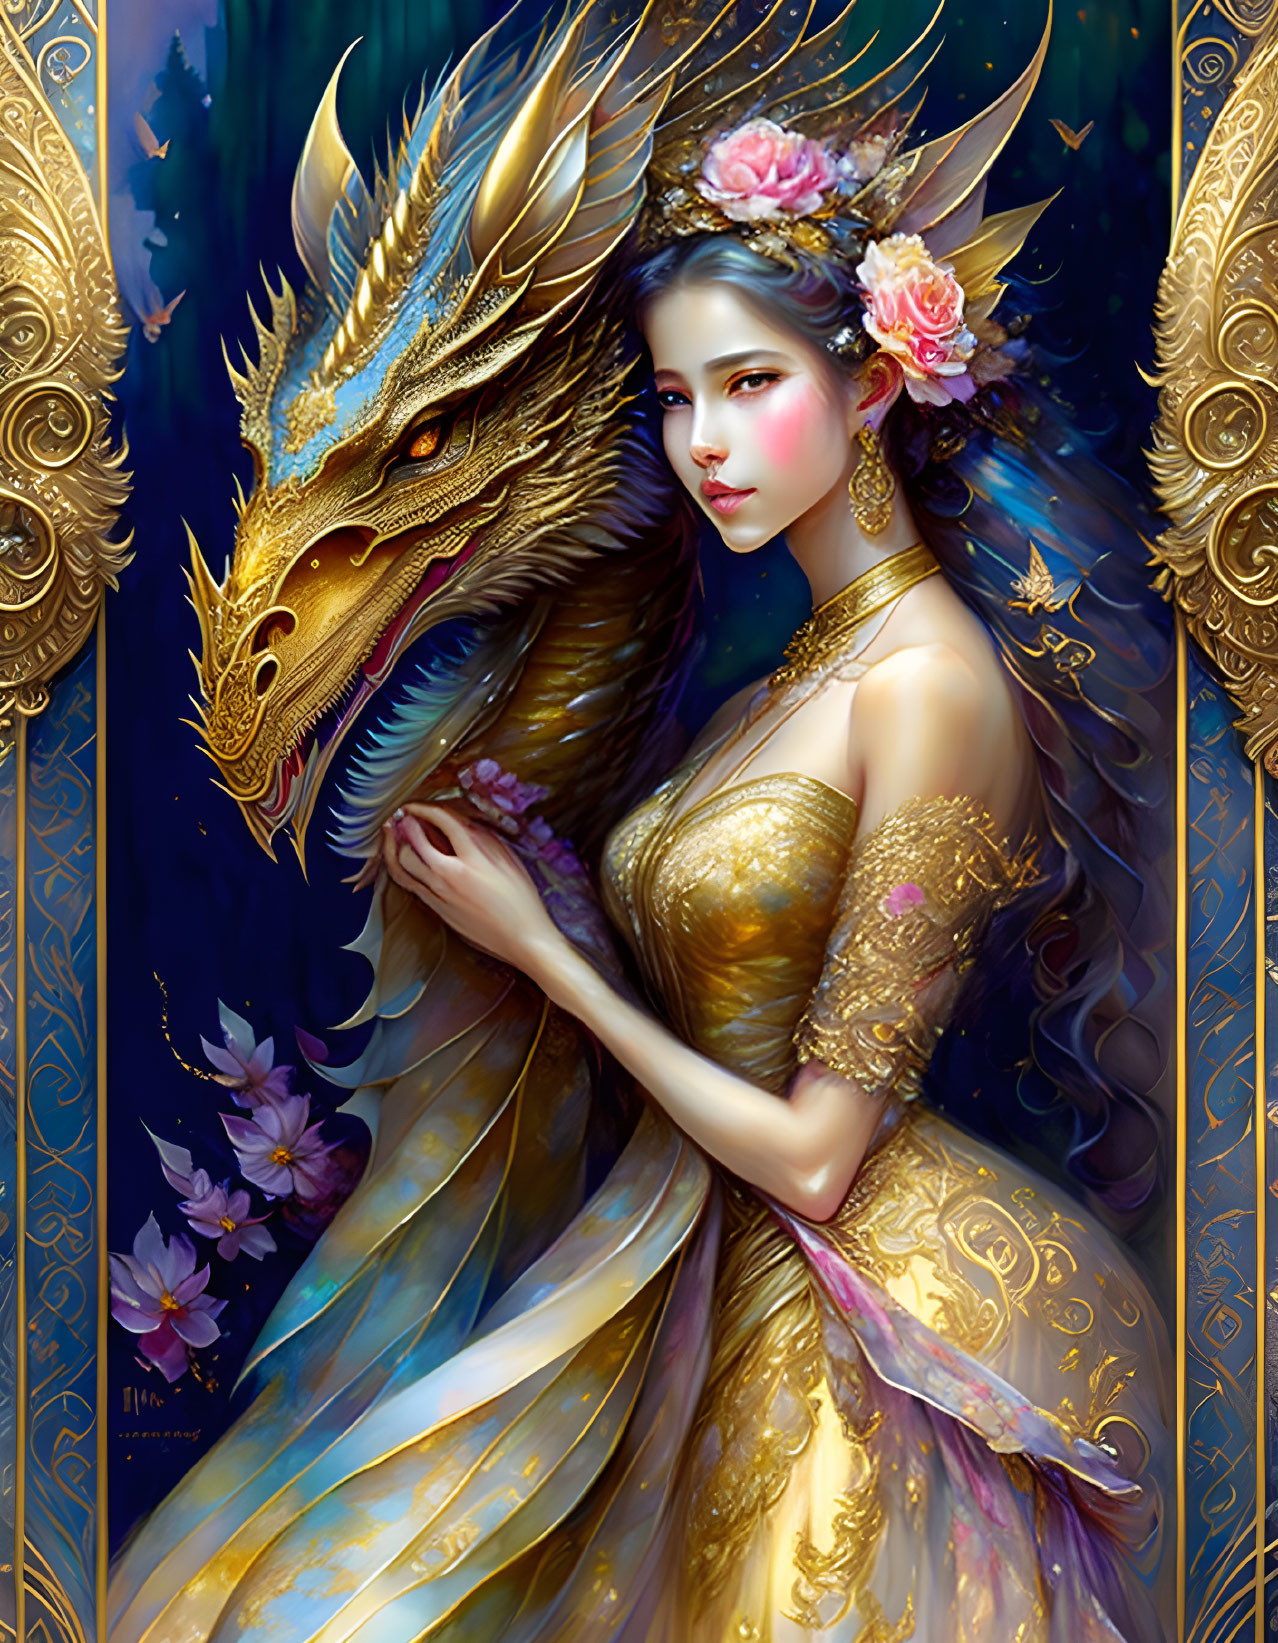 Elaborate Golden Gown Woman with Golden Dragon and Blossoms